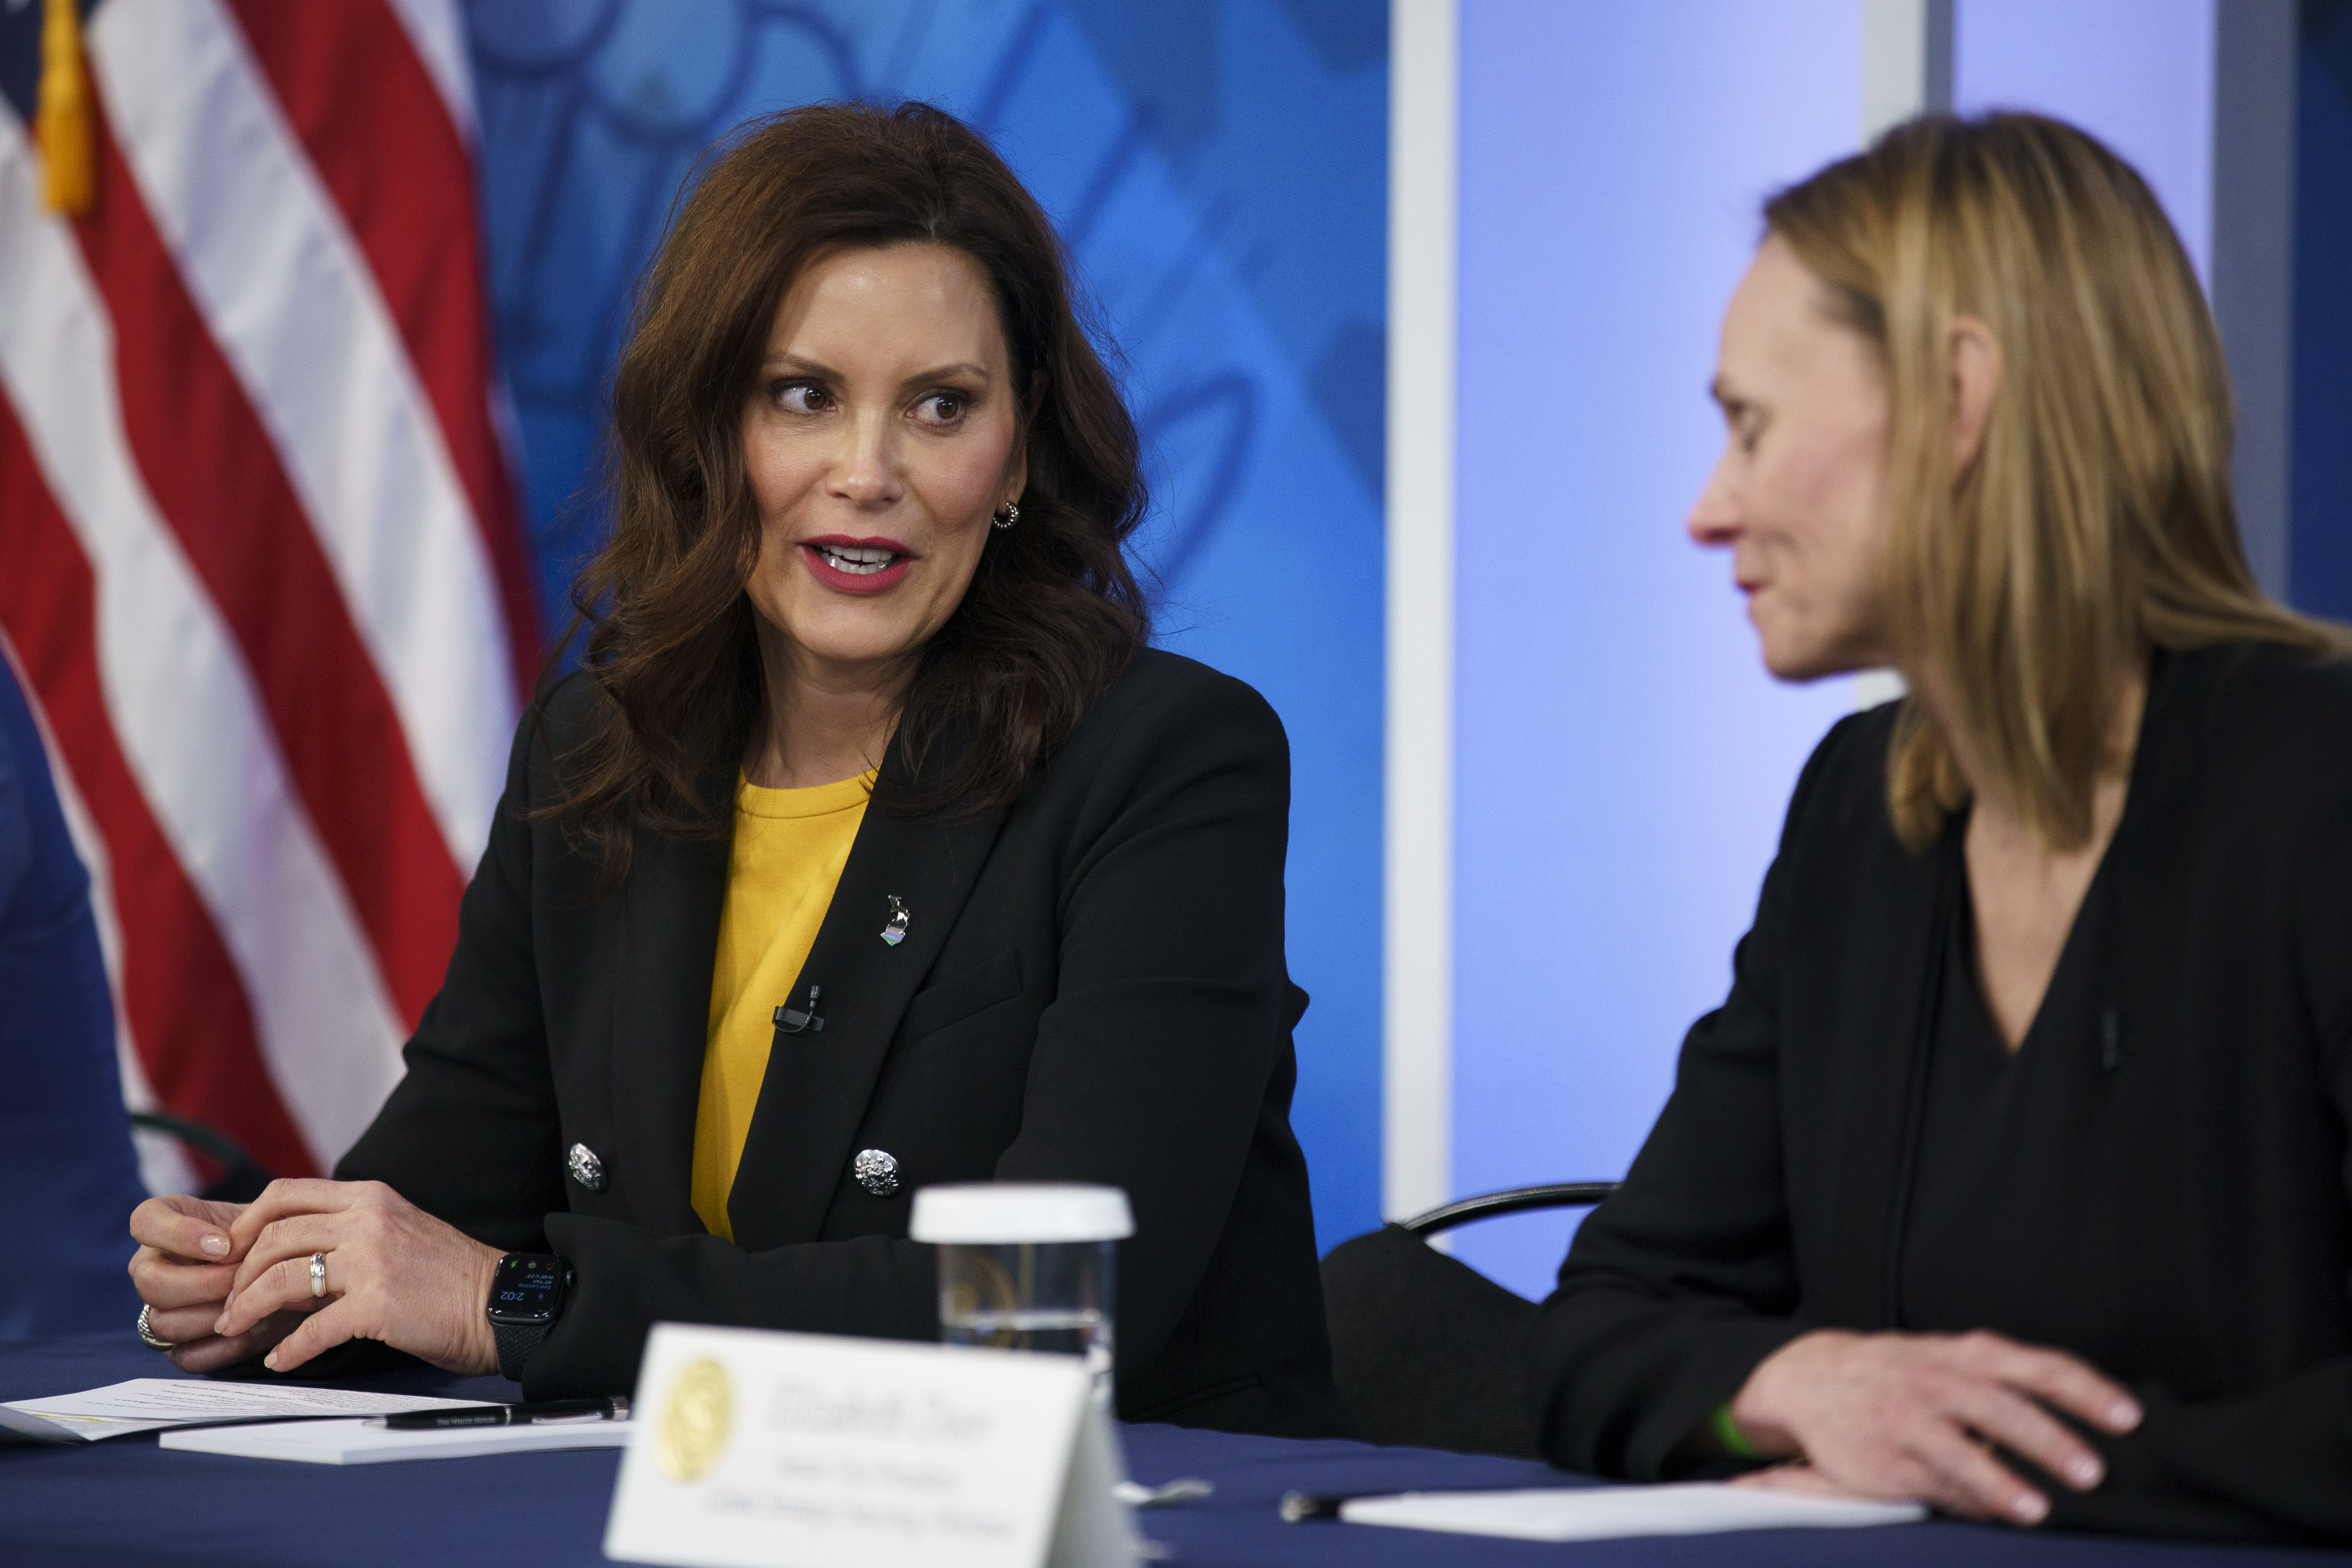 Whitmer Sues To Secure Abortion Rights, Vacate Ban